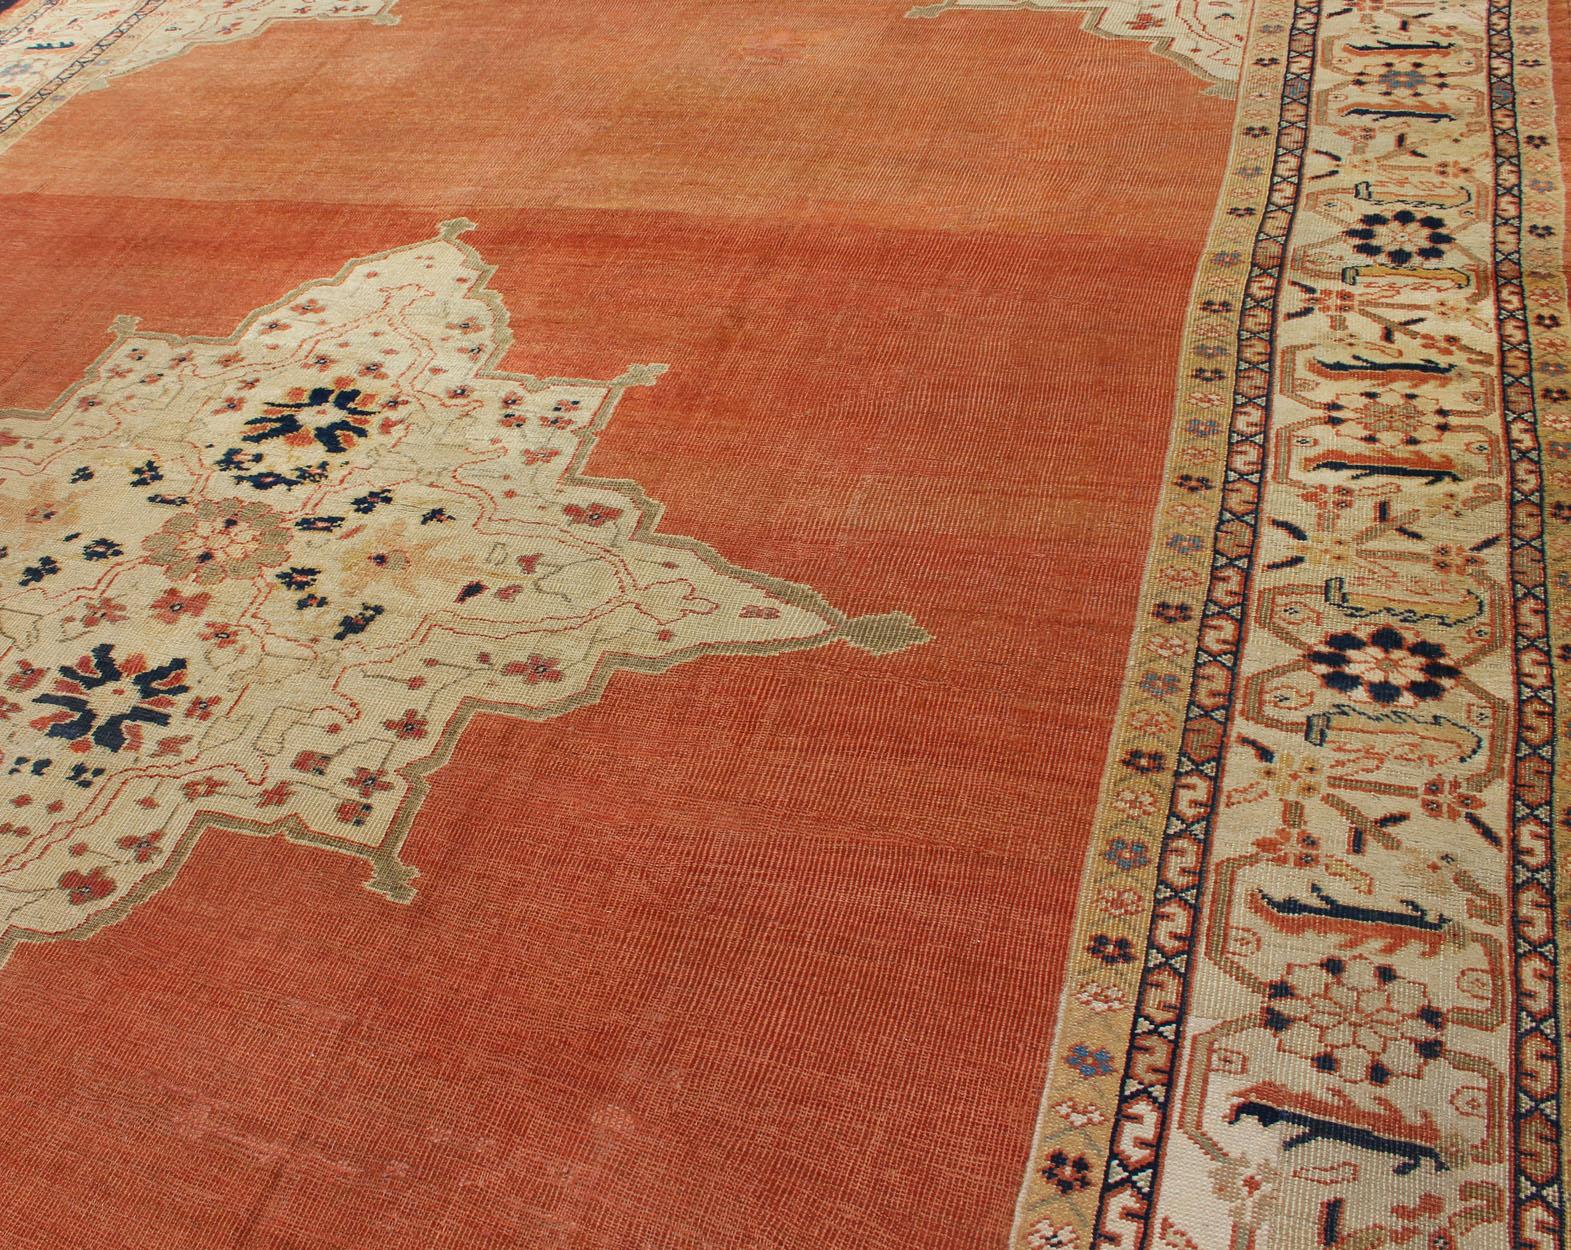 Antique Large Ziegler Sultanabad Rug in Soft Orange, Cream and Navy Blue For Sale 12